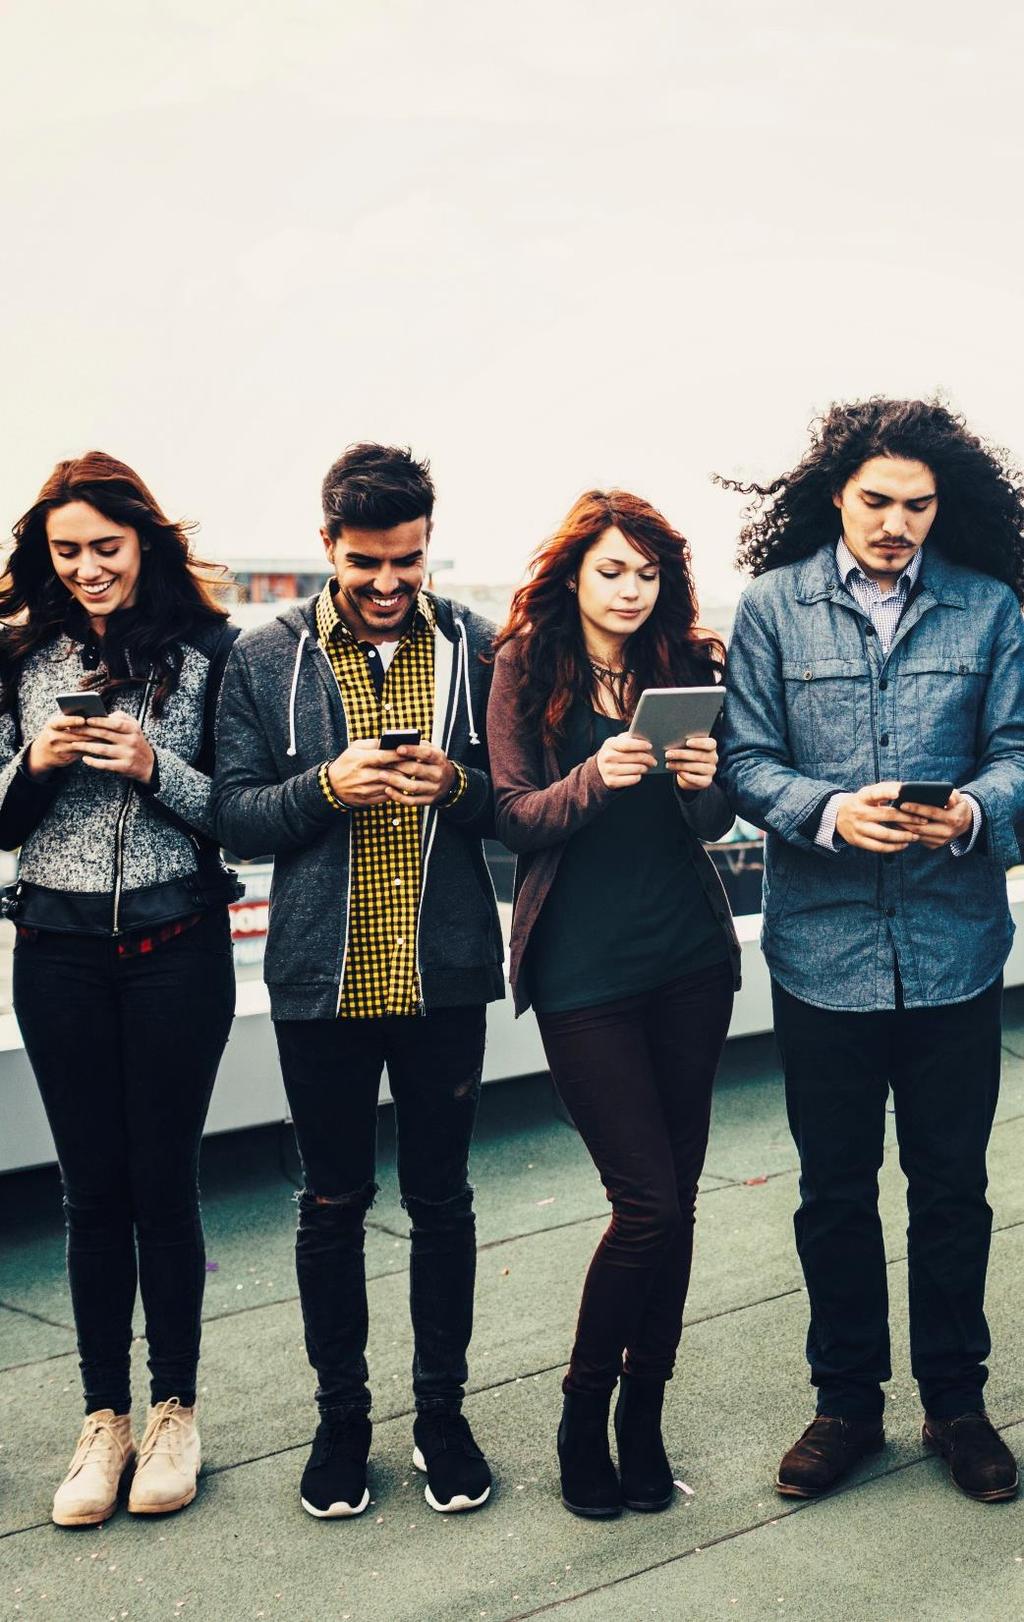 58% of millennials expect to engage with a company whenever and via whichever channel they choose 2 We are marketers in a digital world. We know that today s path to purchase is anything but linear.